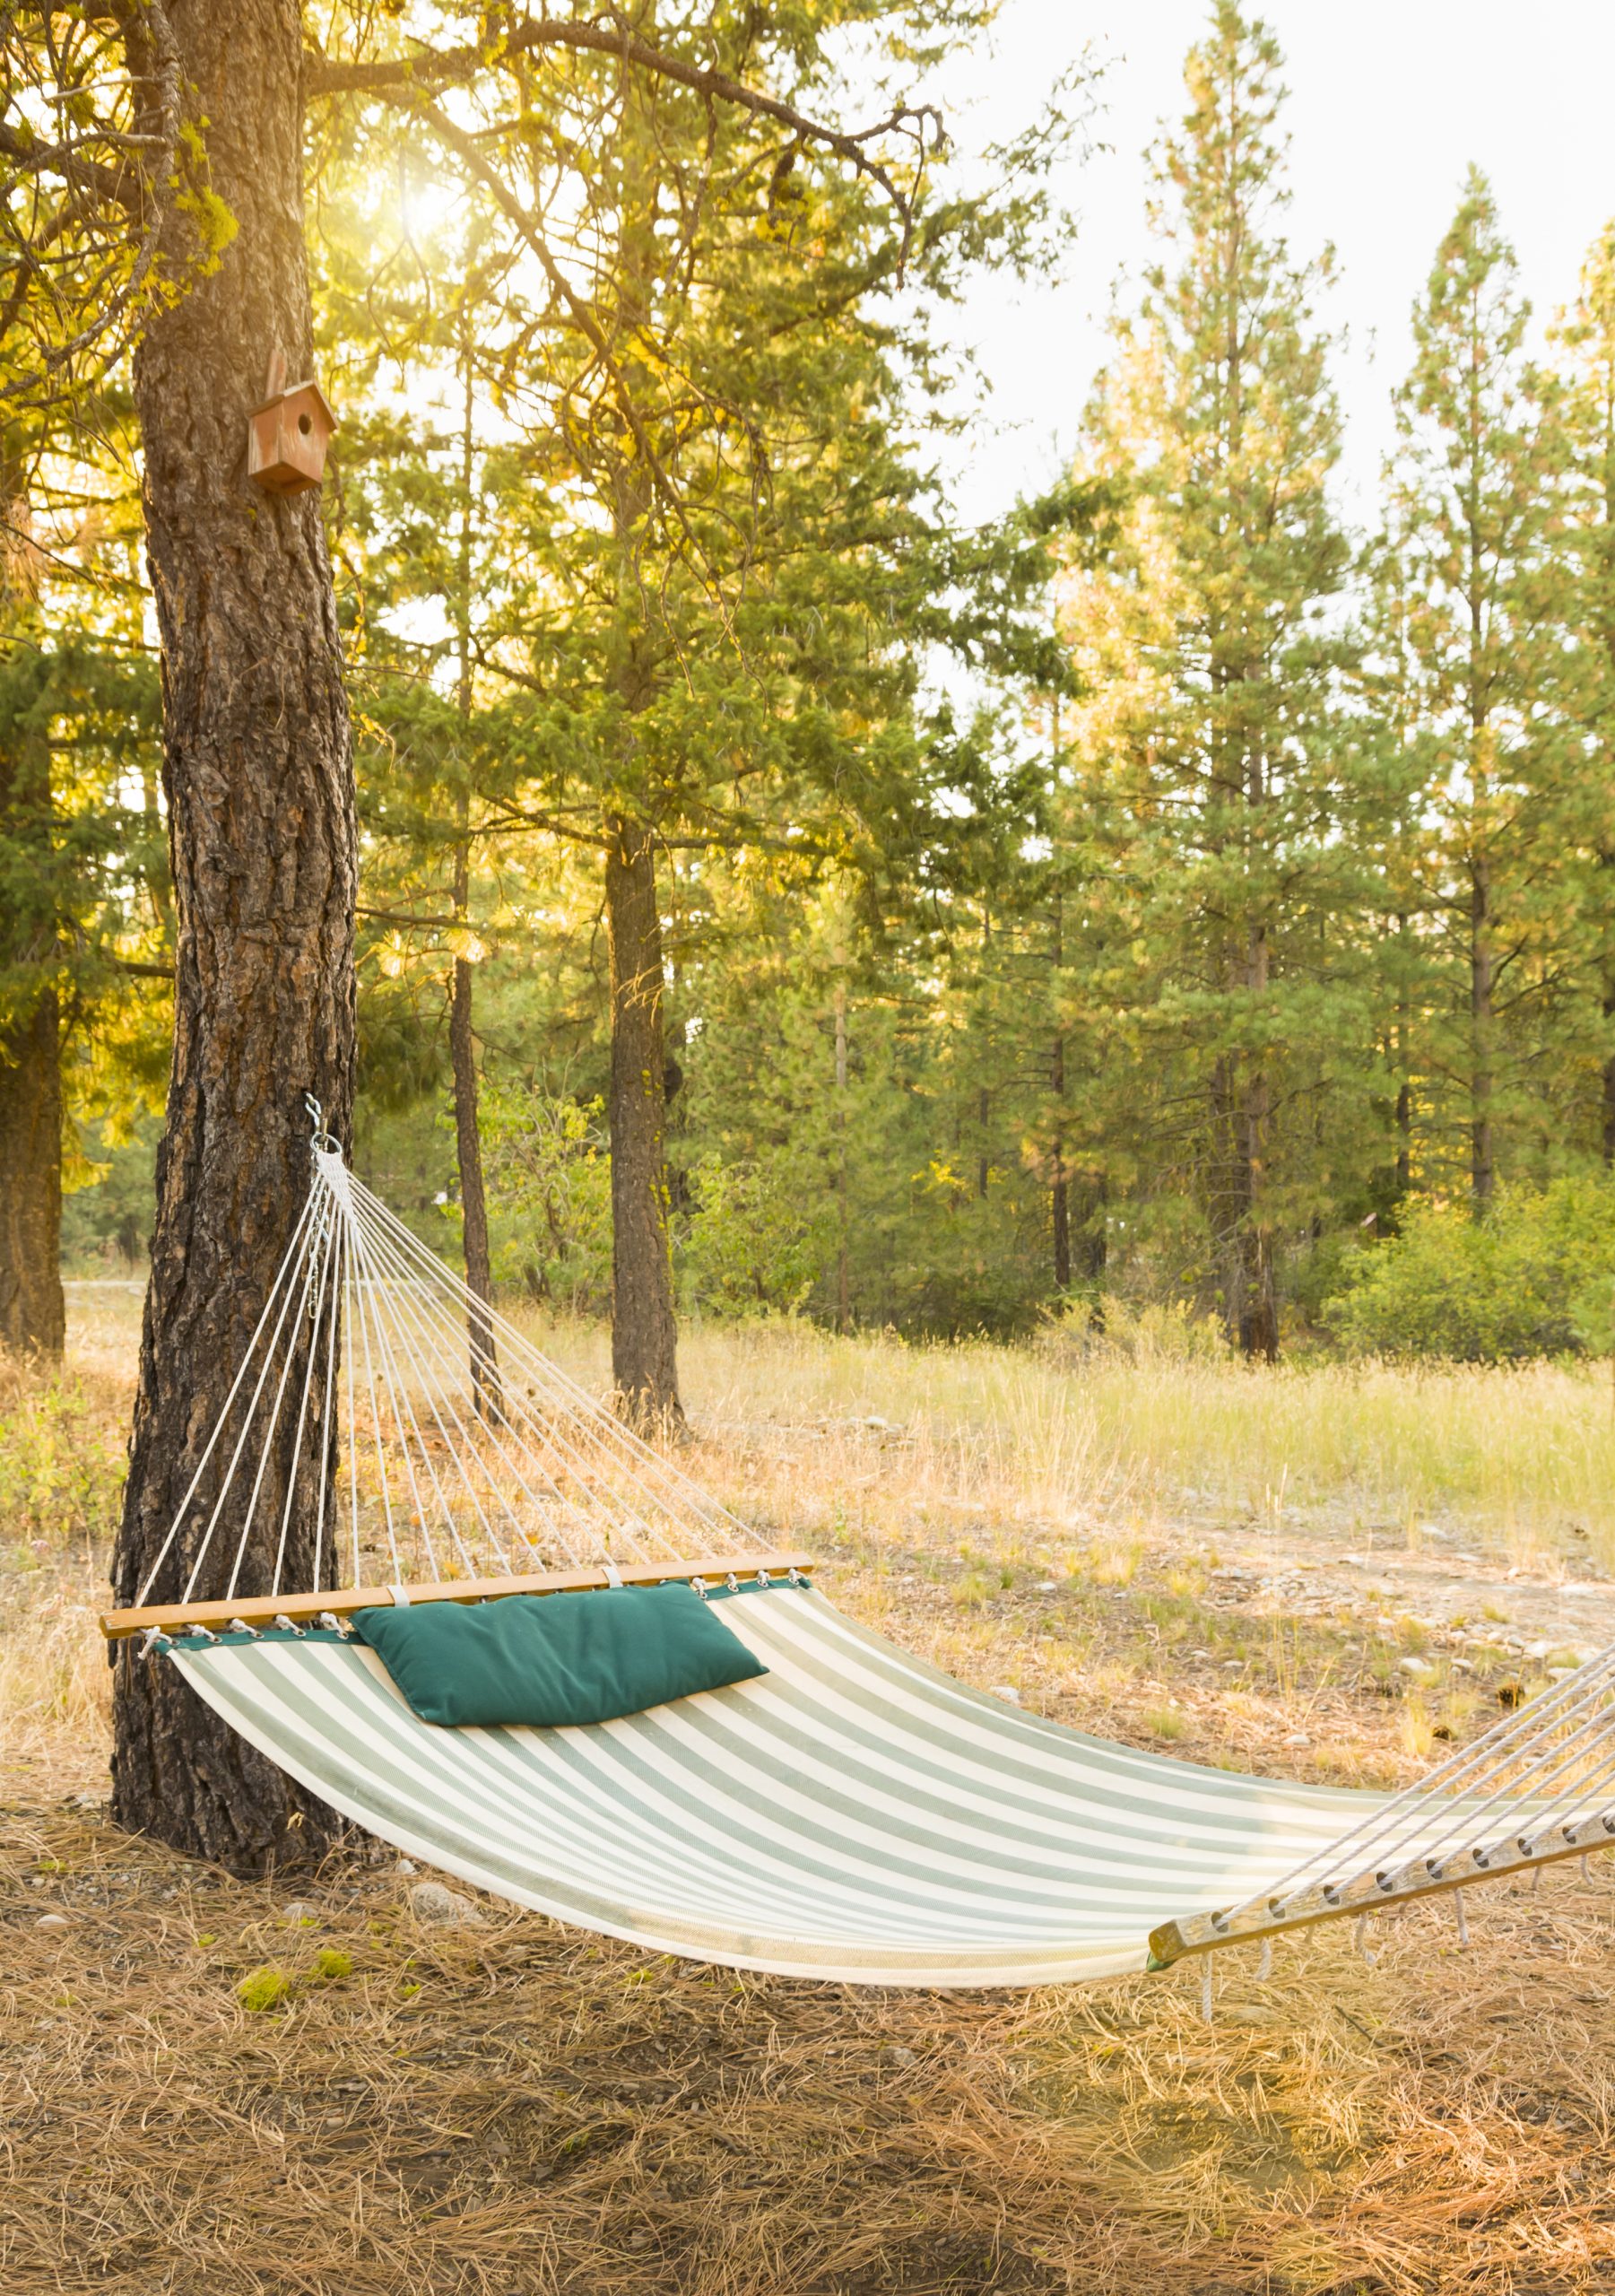 Empty hammock hanging from pine tree in backyard forest. Relaxing summer afternoon camping vacation background concept.